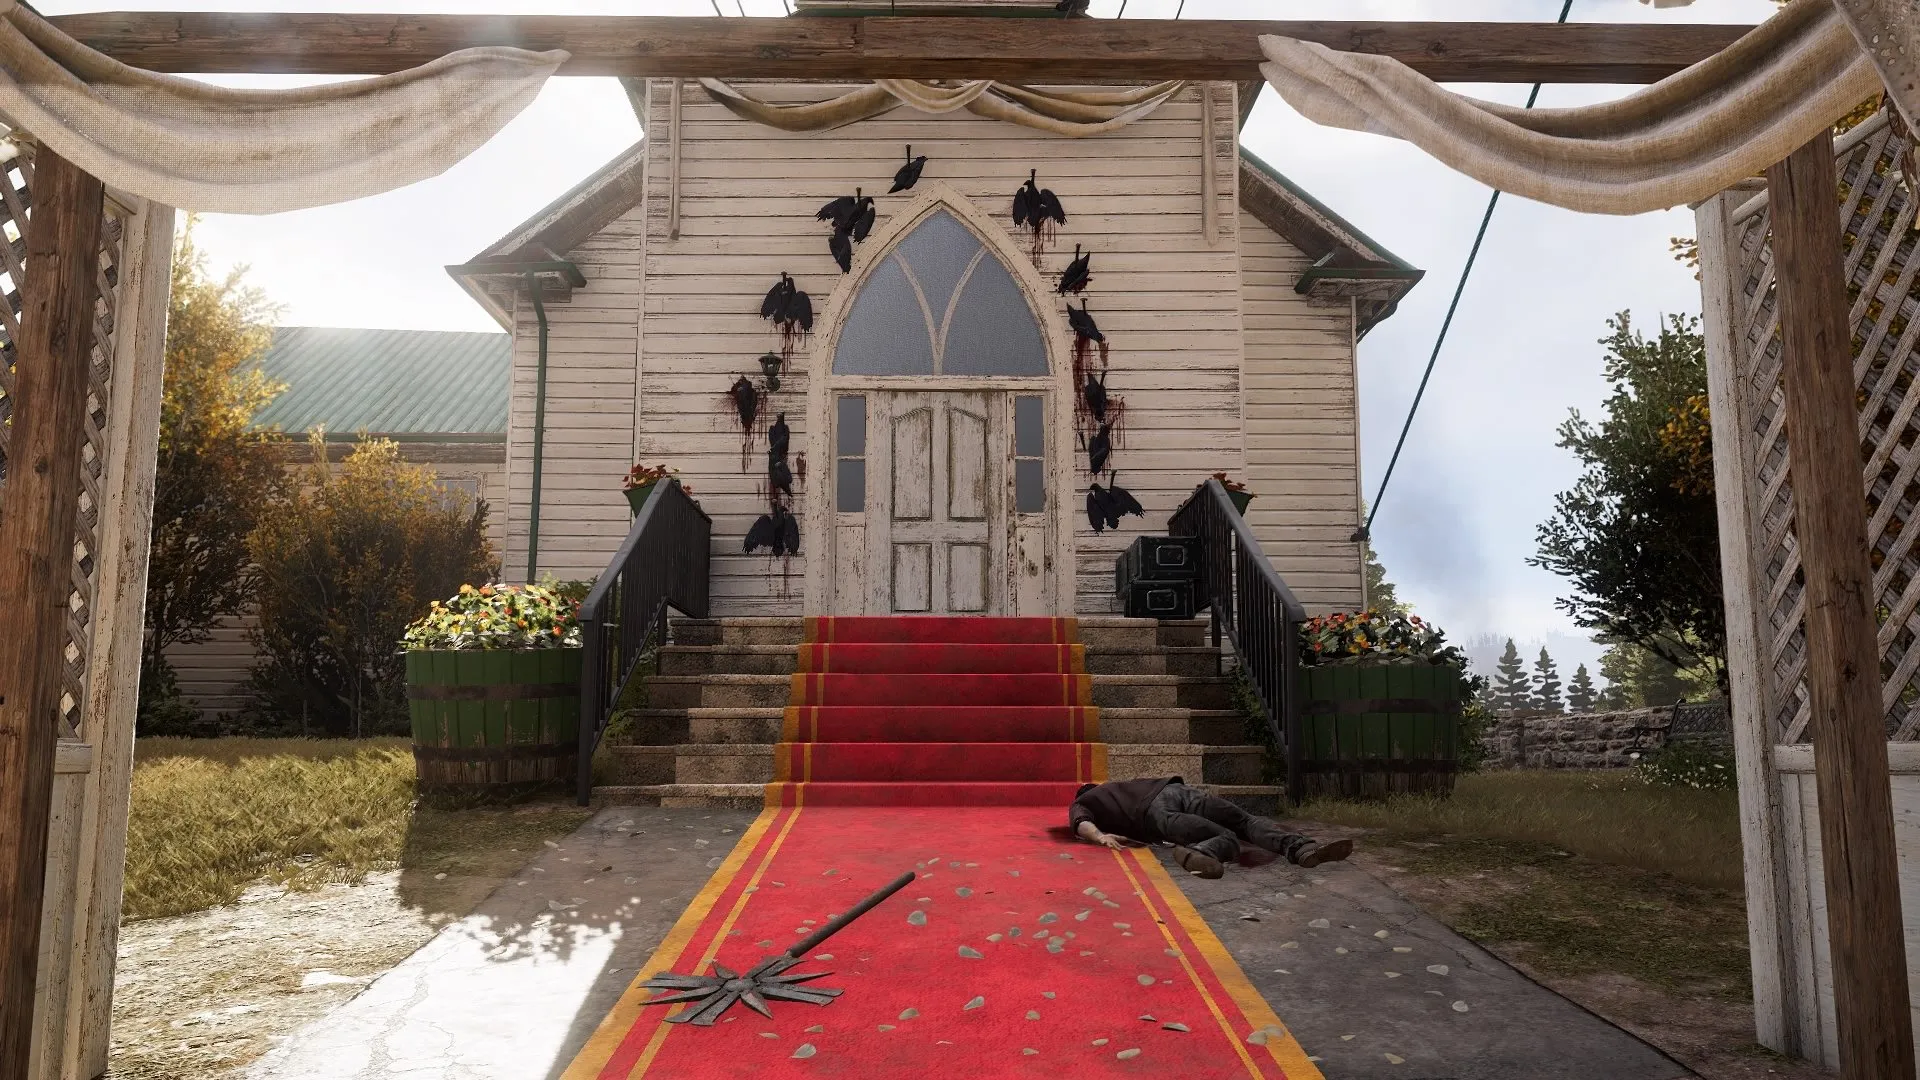 Far Cry 5's interrupting story ruins everything